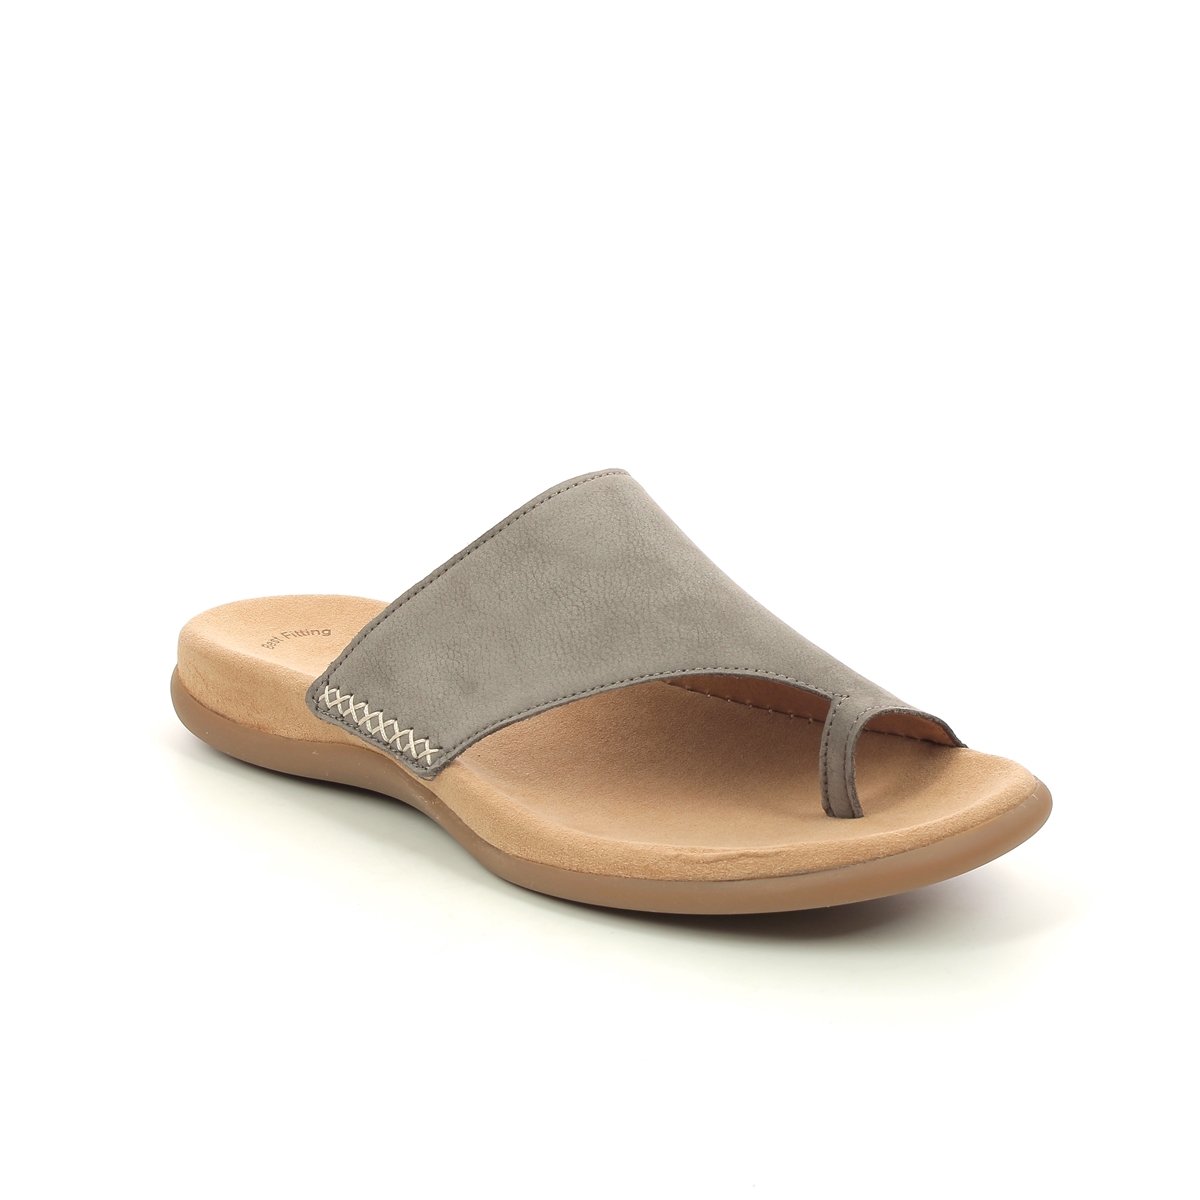 Gabor Lanzarote Taupe Nubuck Womens Toe Post Sandals 03.700.13 In Size 38 In Plain Taupe Nubuck  Womens Comfortable Sandals In Soft Taupe Nubuck Leath